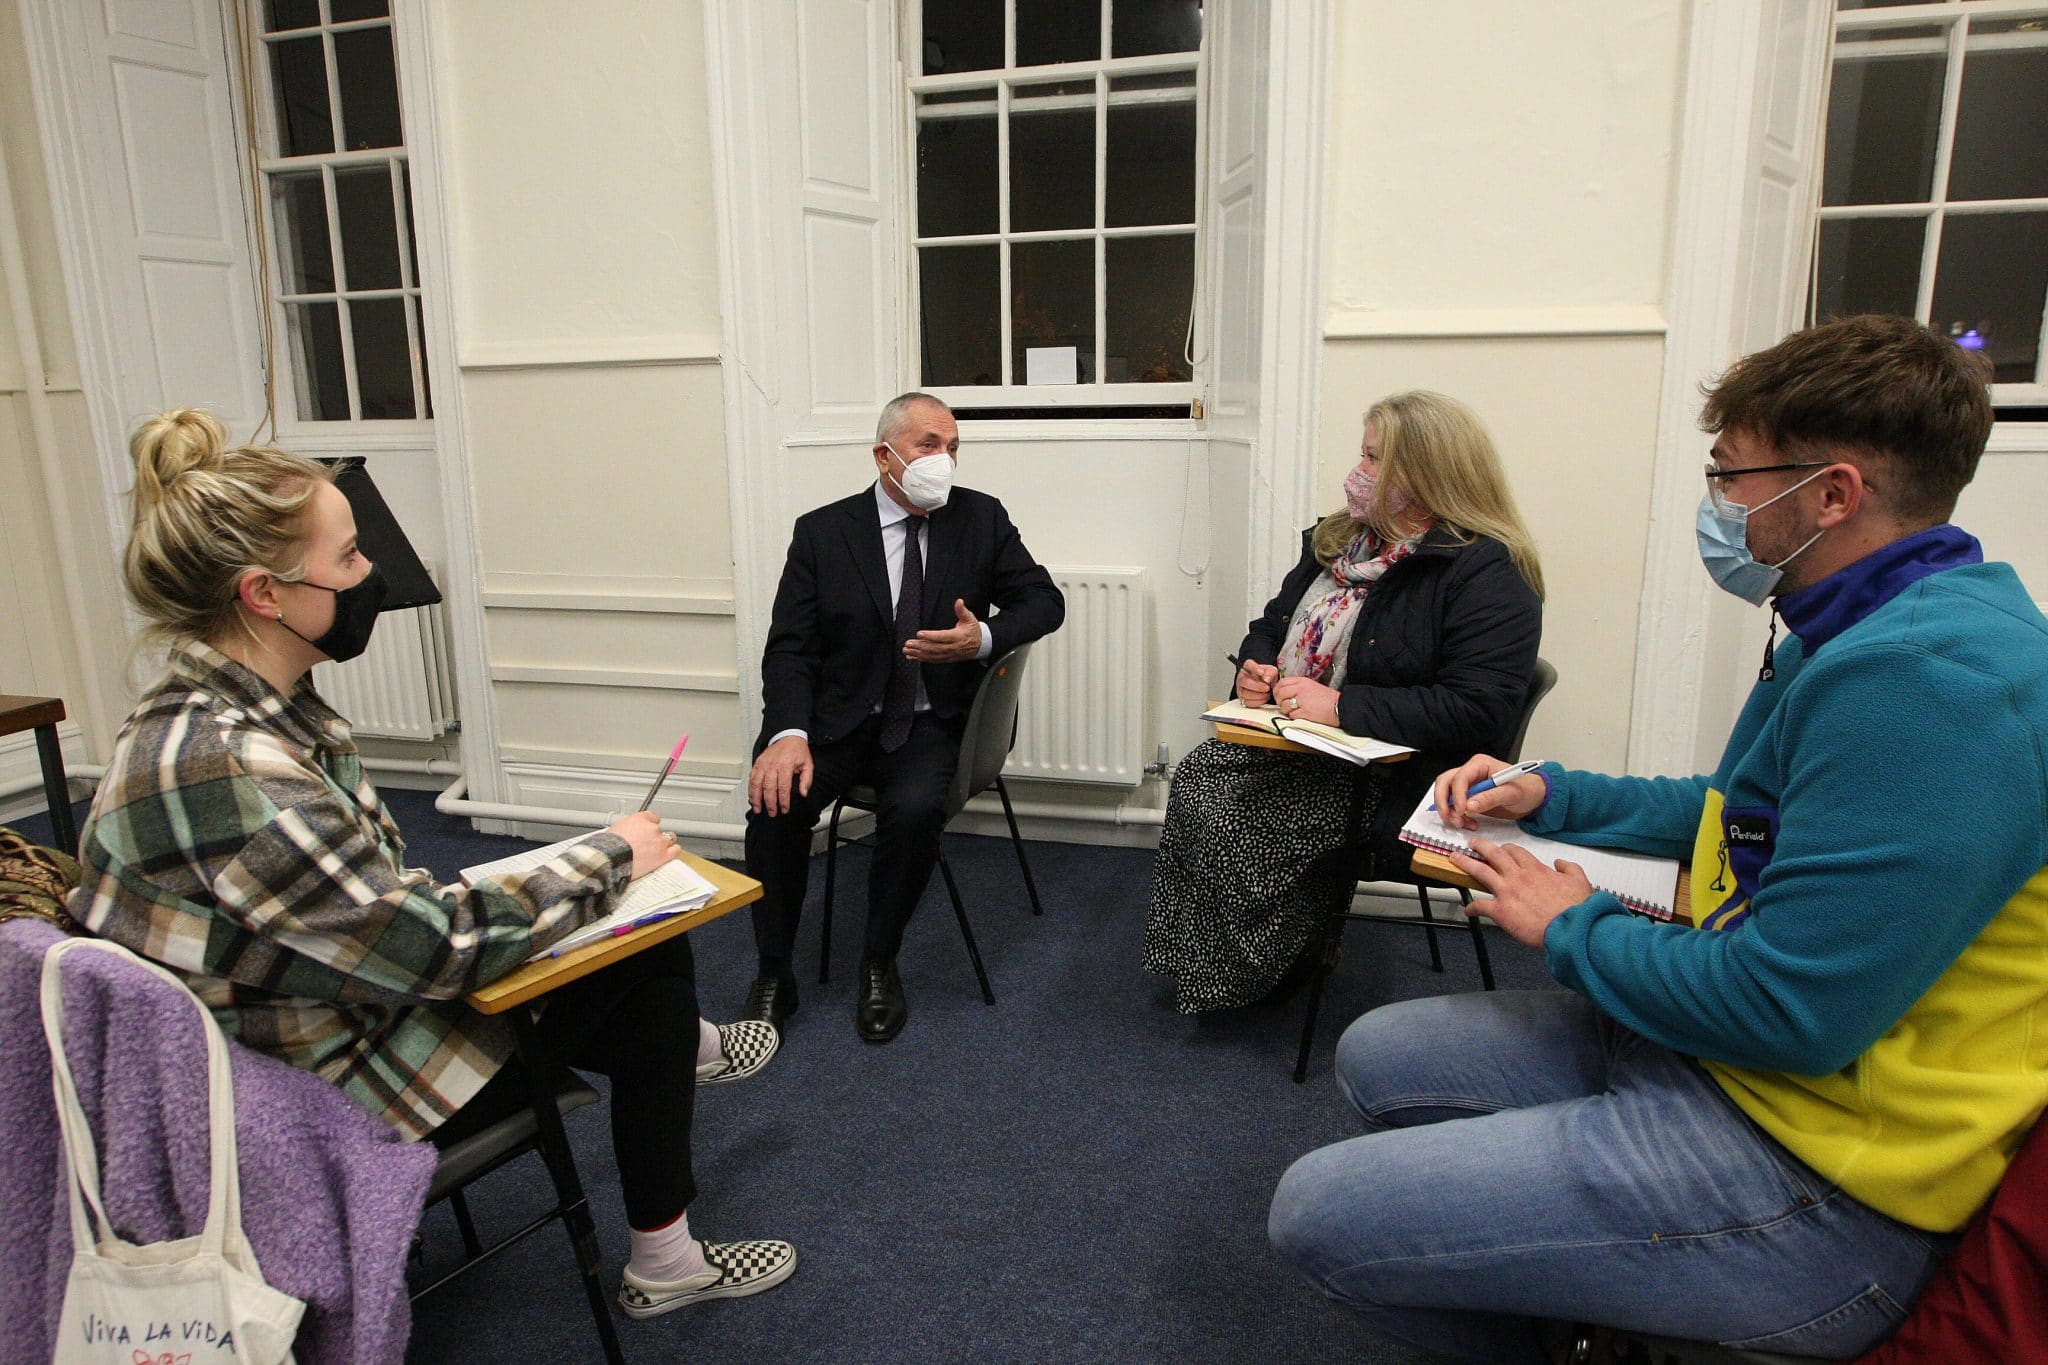 John McGuiness interviewed by Journalism students at Carlow College, St. Patrick's